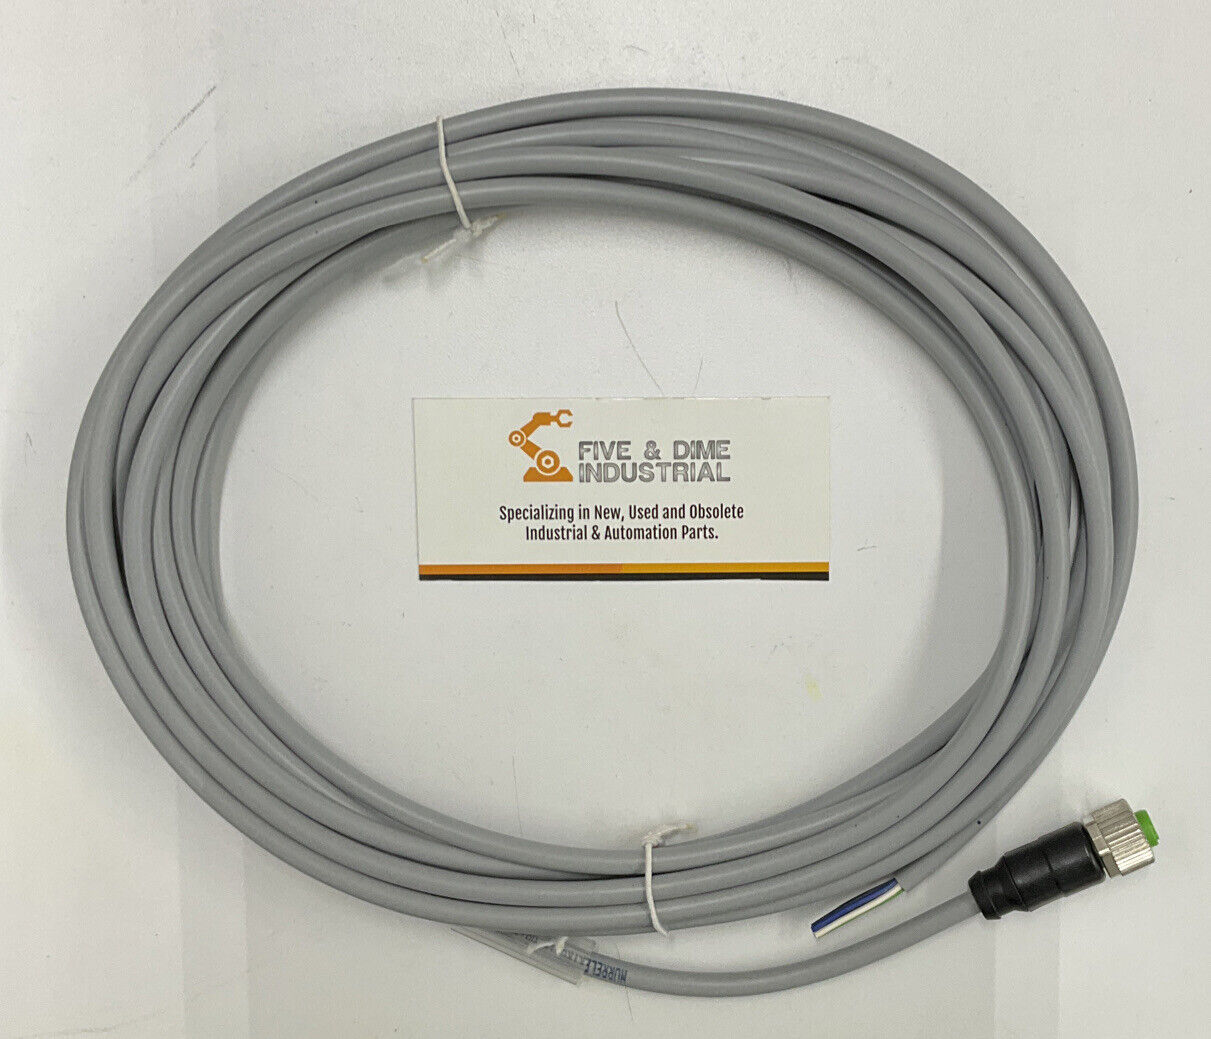 MURR 7000-12241-2150500 M12 Female Connector Straight w/ Cable 5 Meters (CBL132)